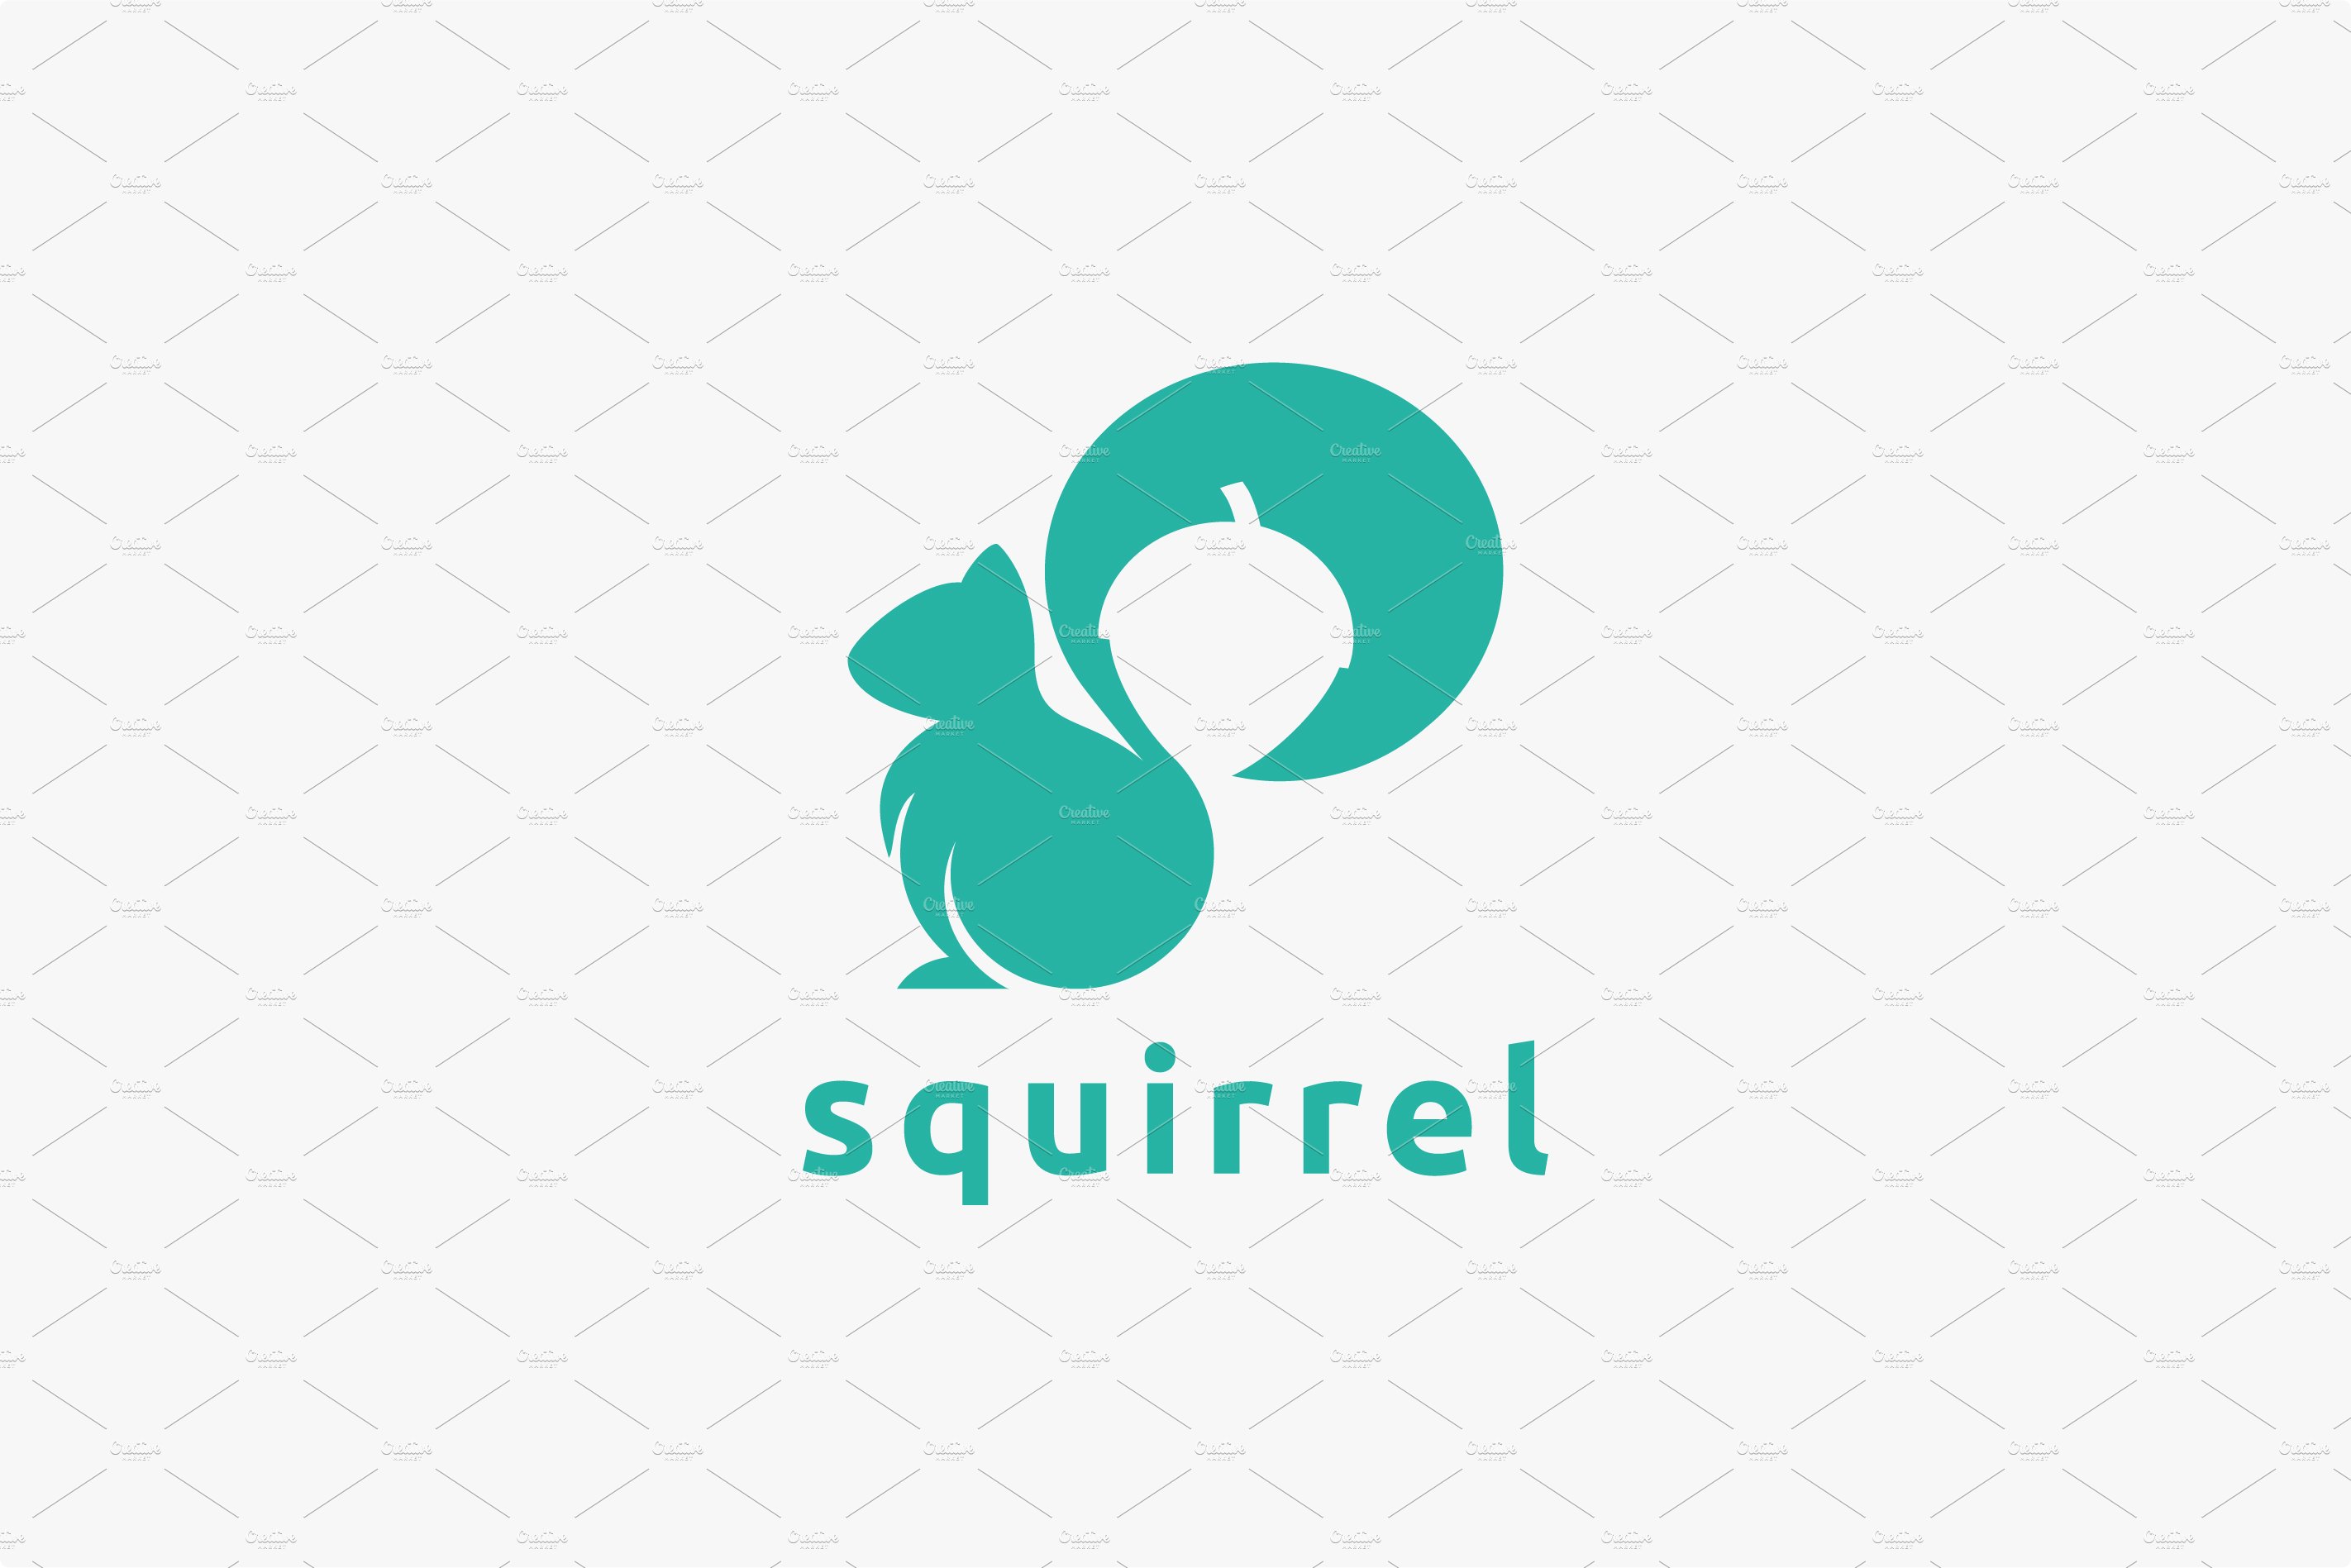 Squirrel and nuts logo icon cover image.